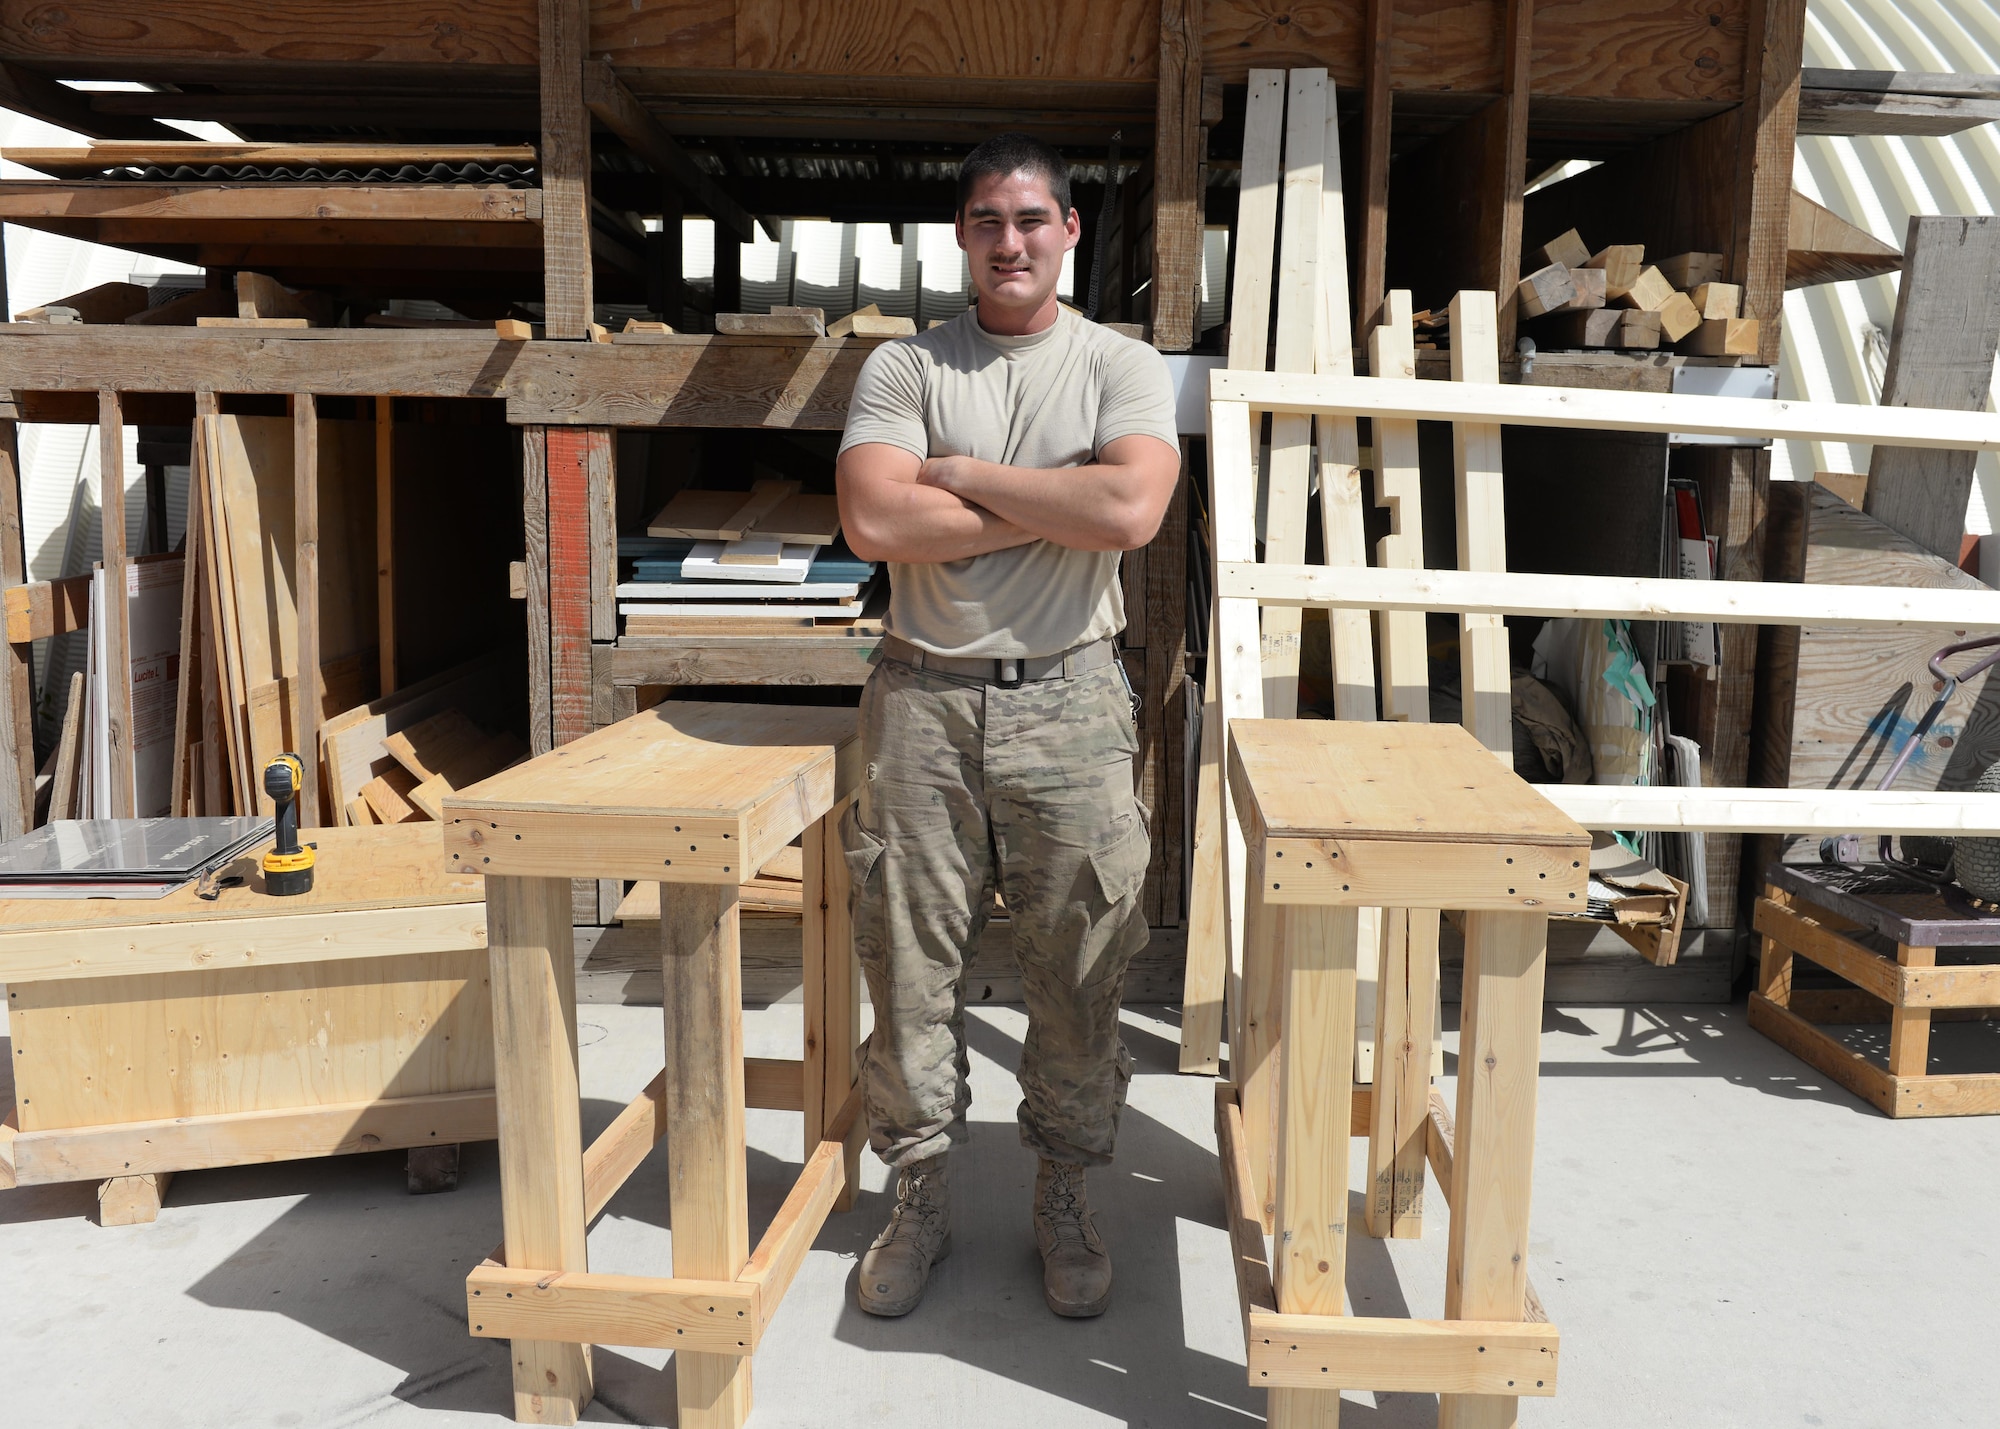 U.S. Air Force Senior Airman Carl Vanlandingham, 455th Expeditionary Civil Engineer Squadron structural journeyman, poses next to two platforms he made, July 16, 2015, at Bagram Airfield, Afghanistan. Vanlandingham builds various projects during duty and on his days off to support the mission here. (U.S. Air Force photo by Senior Airman Cierra Presentado/Released)